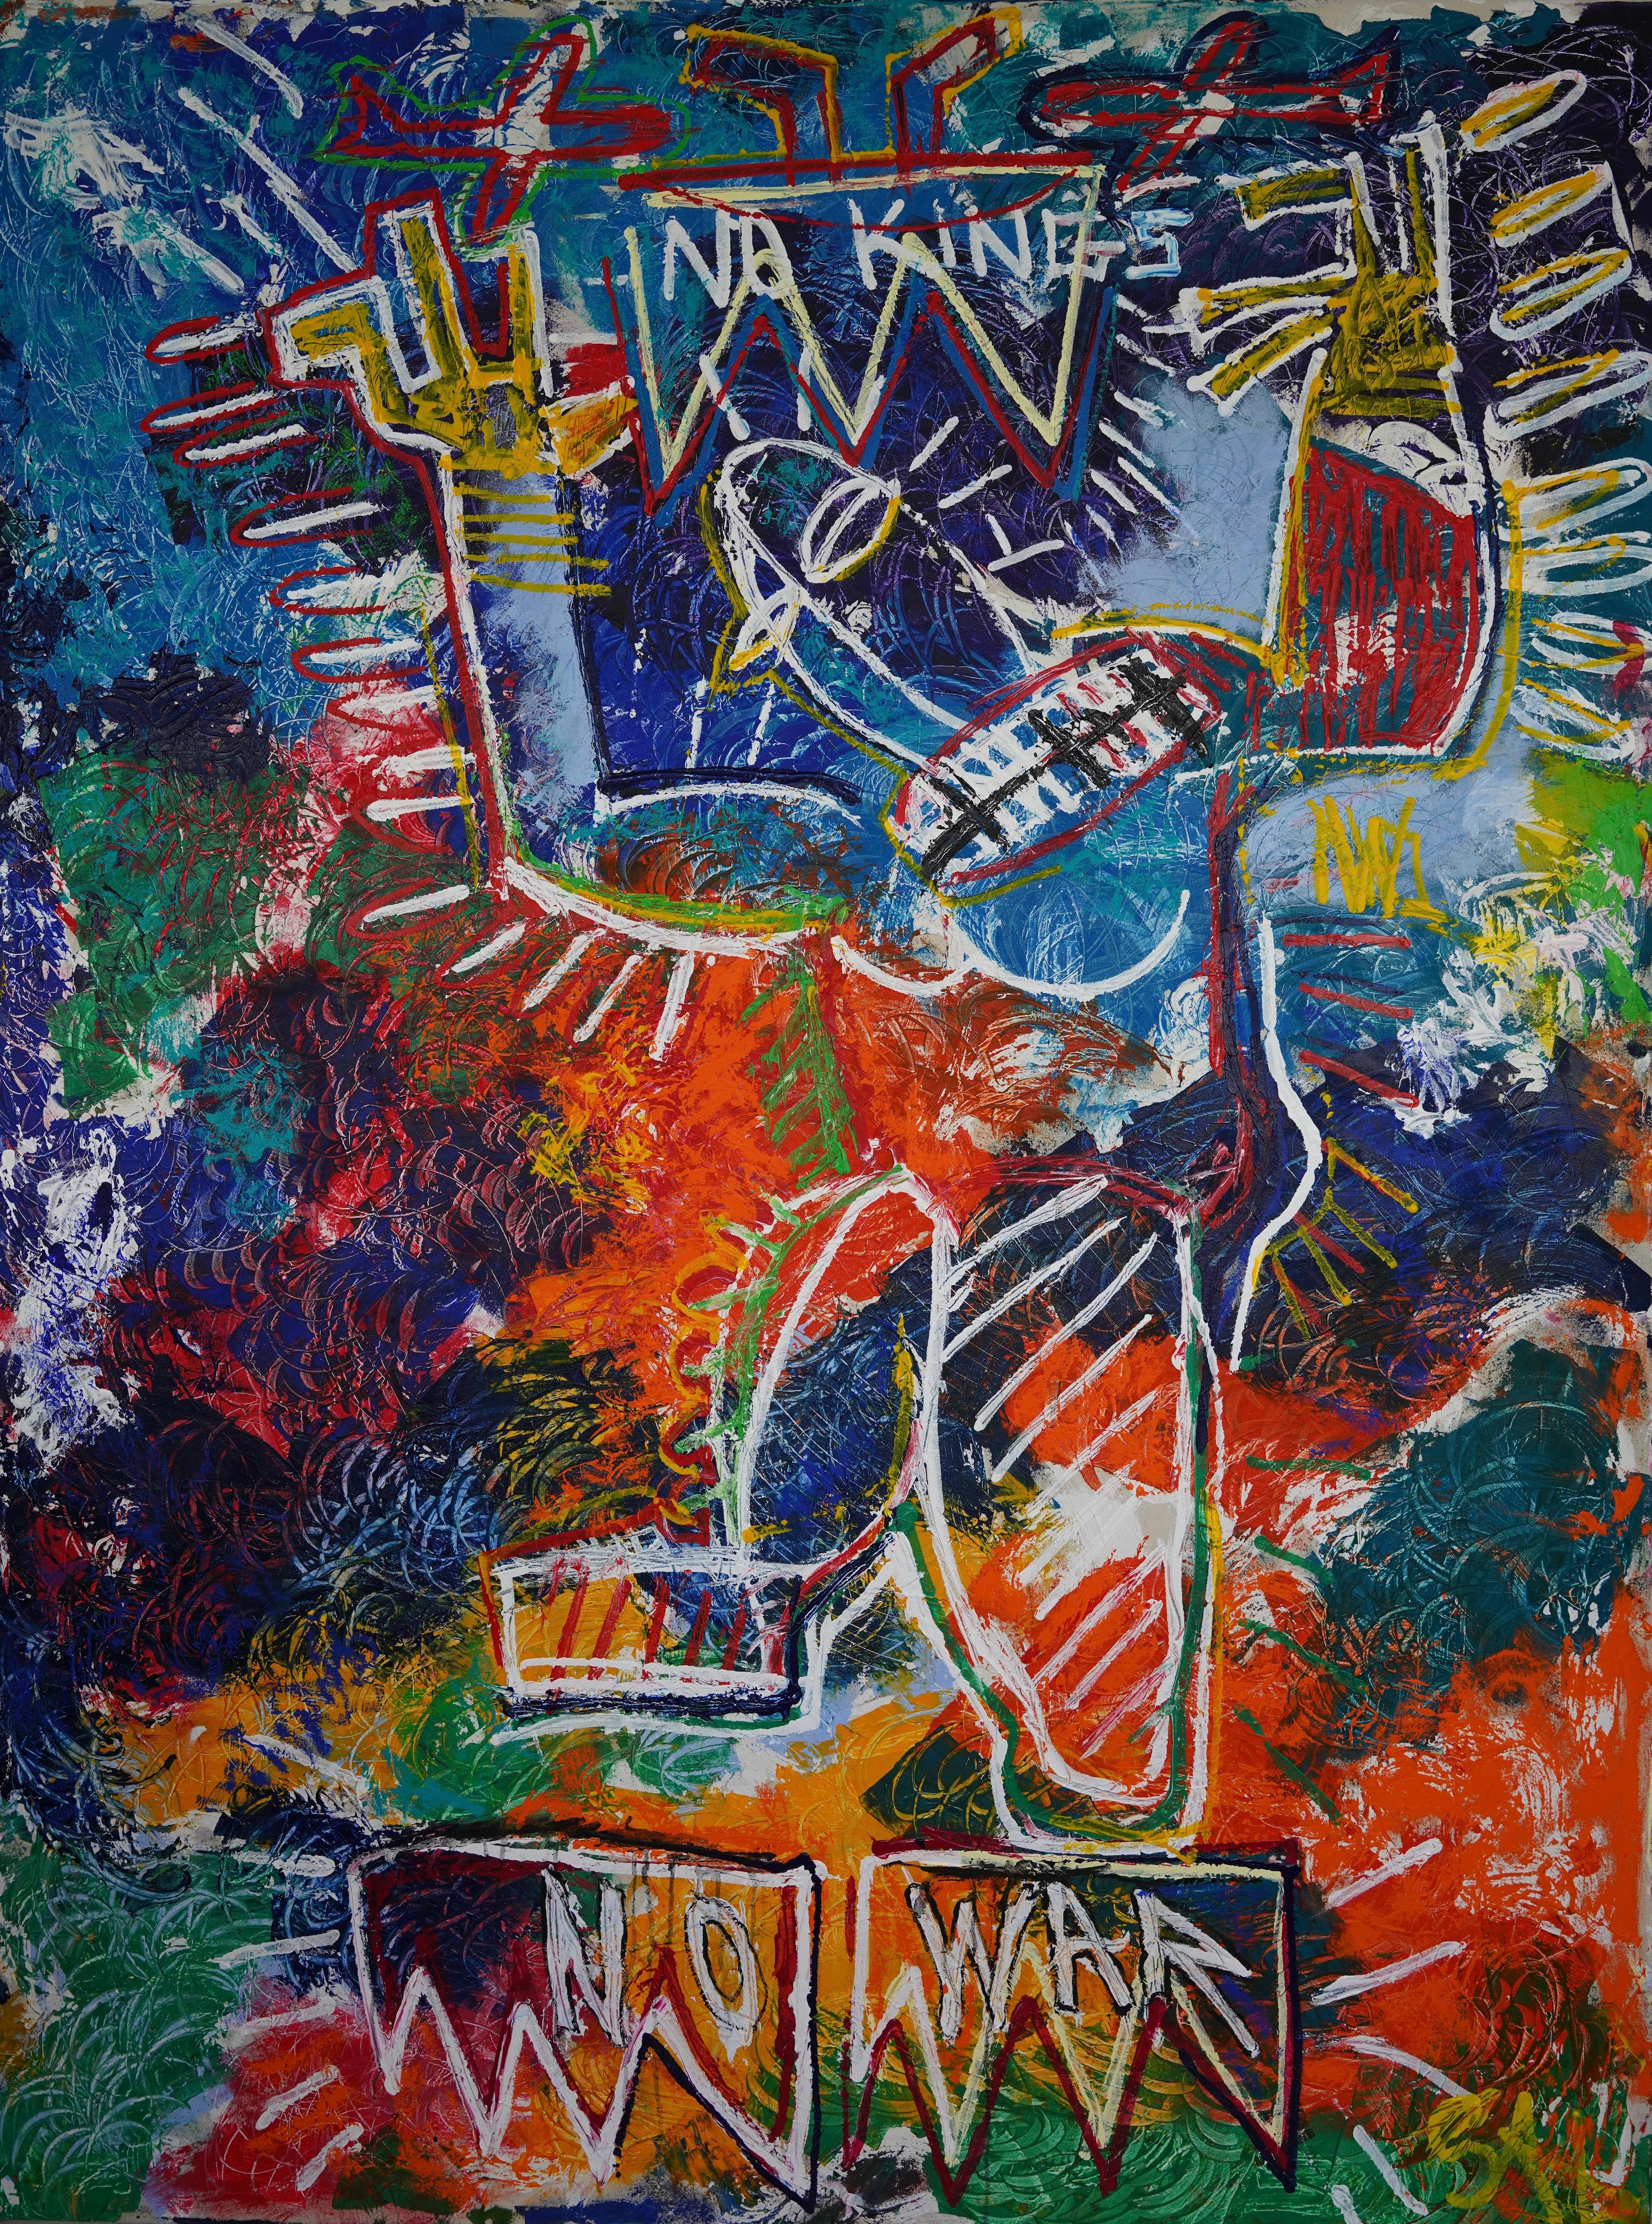 Sax Berlin Abstract Painting - NO KINGS NO WAR:  Large Neo Expressionist Oil Painting